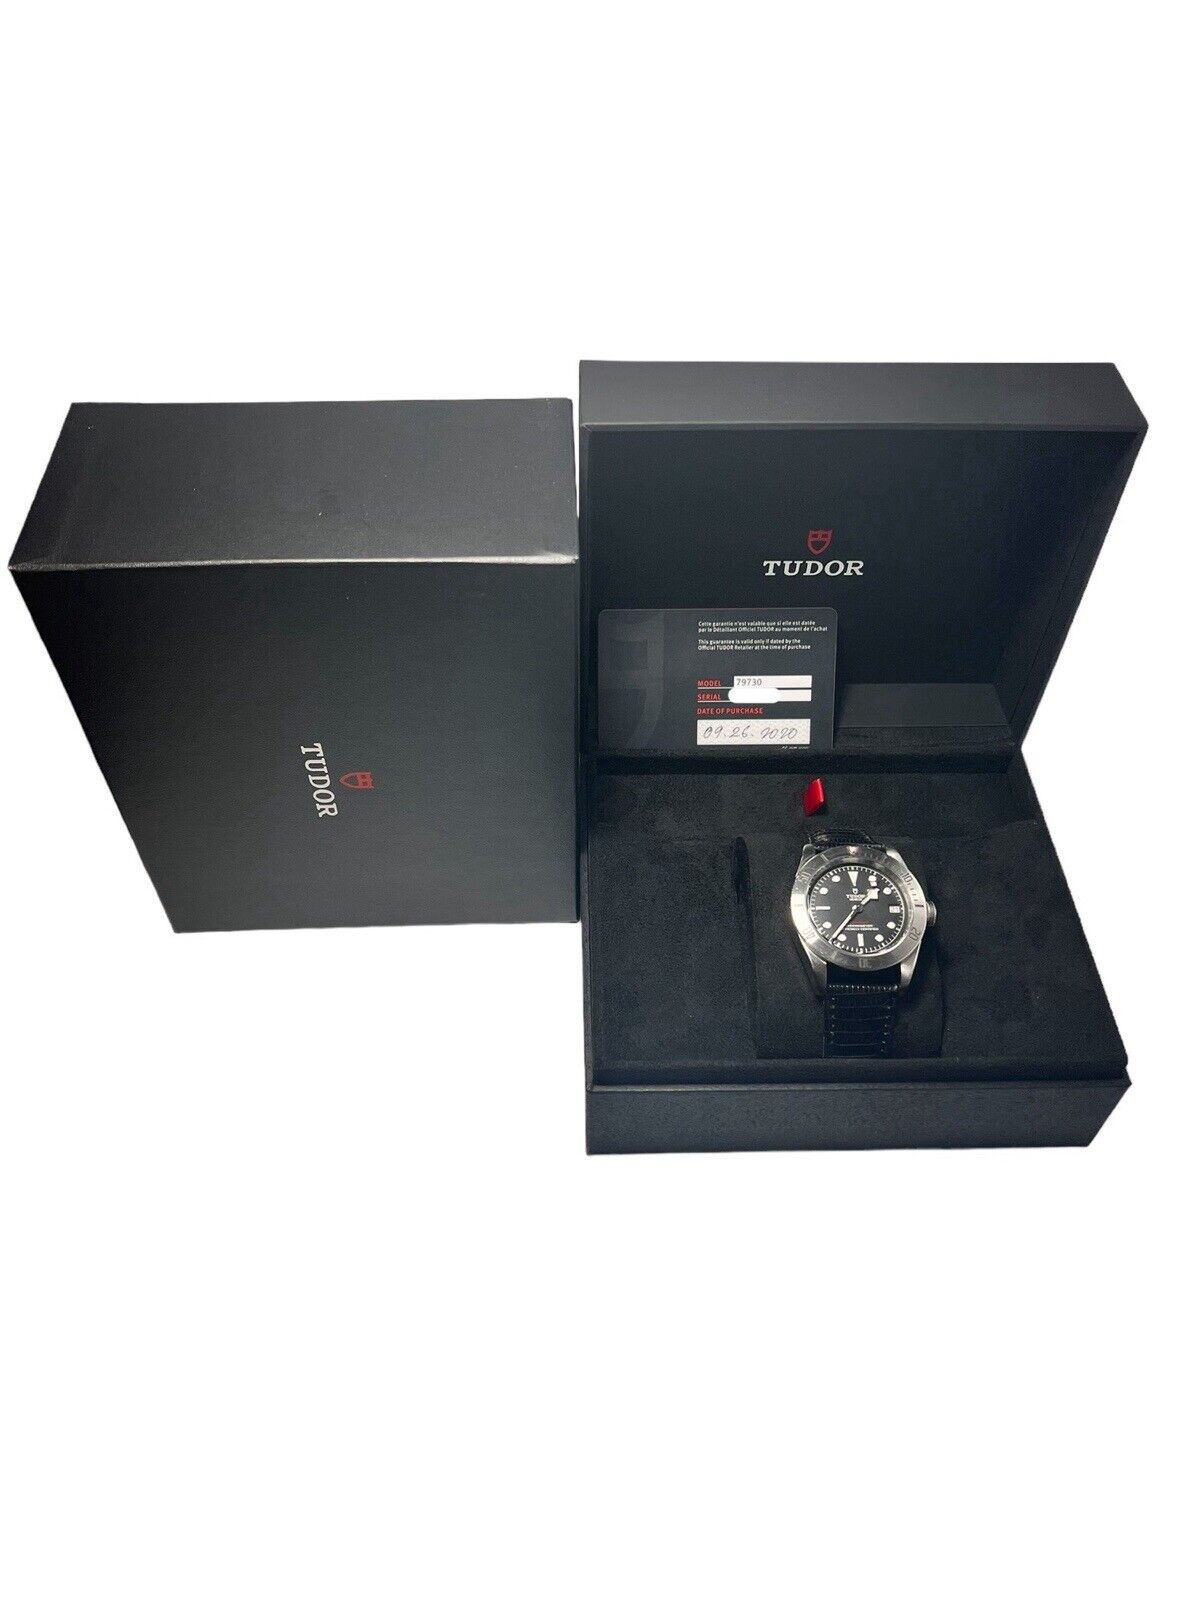 Tudor Black Bay Stainless Steel 41mm Automatic Mens Watch 79730 - Box/Papers